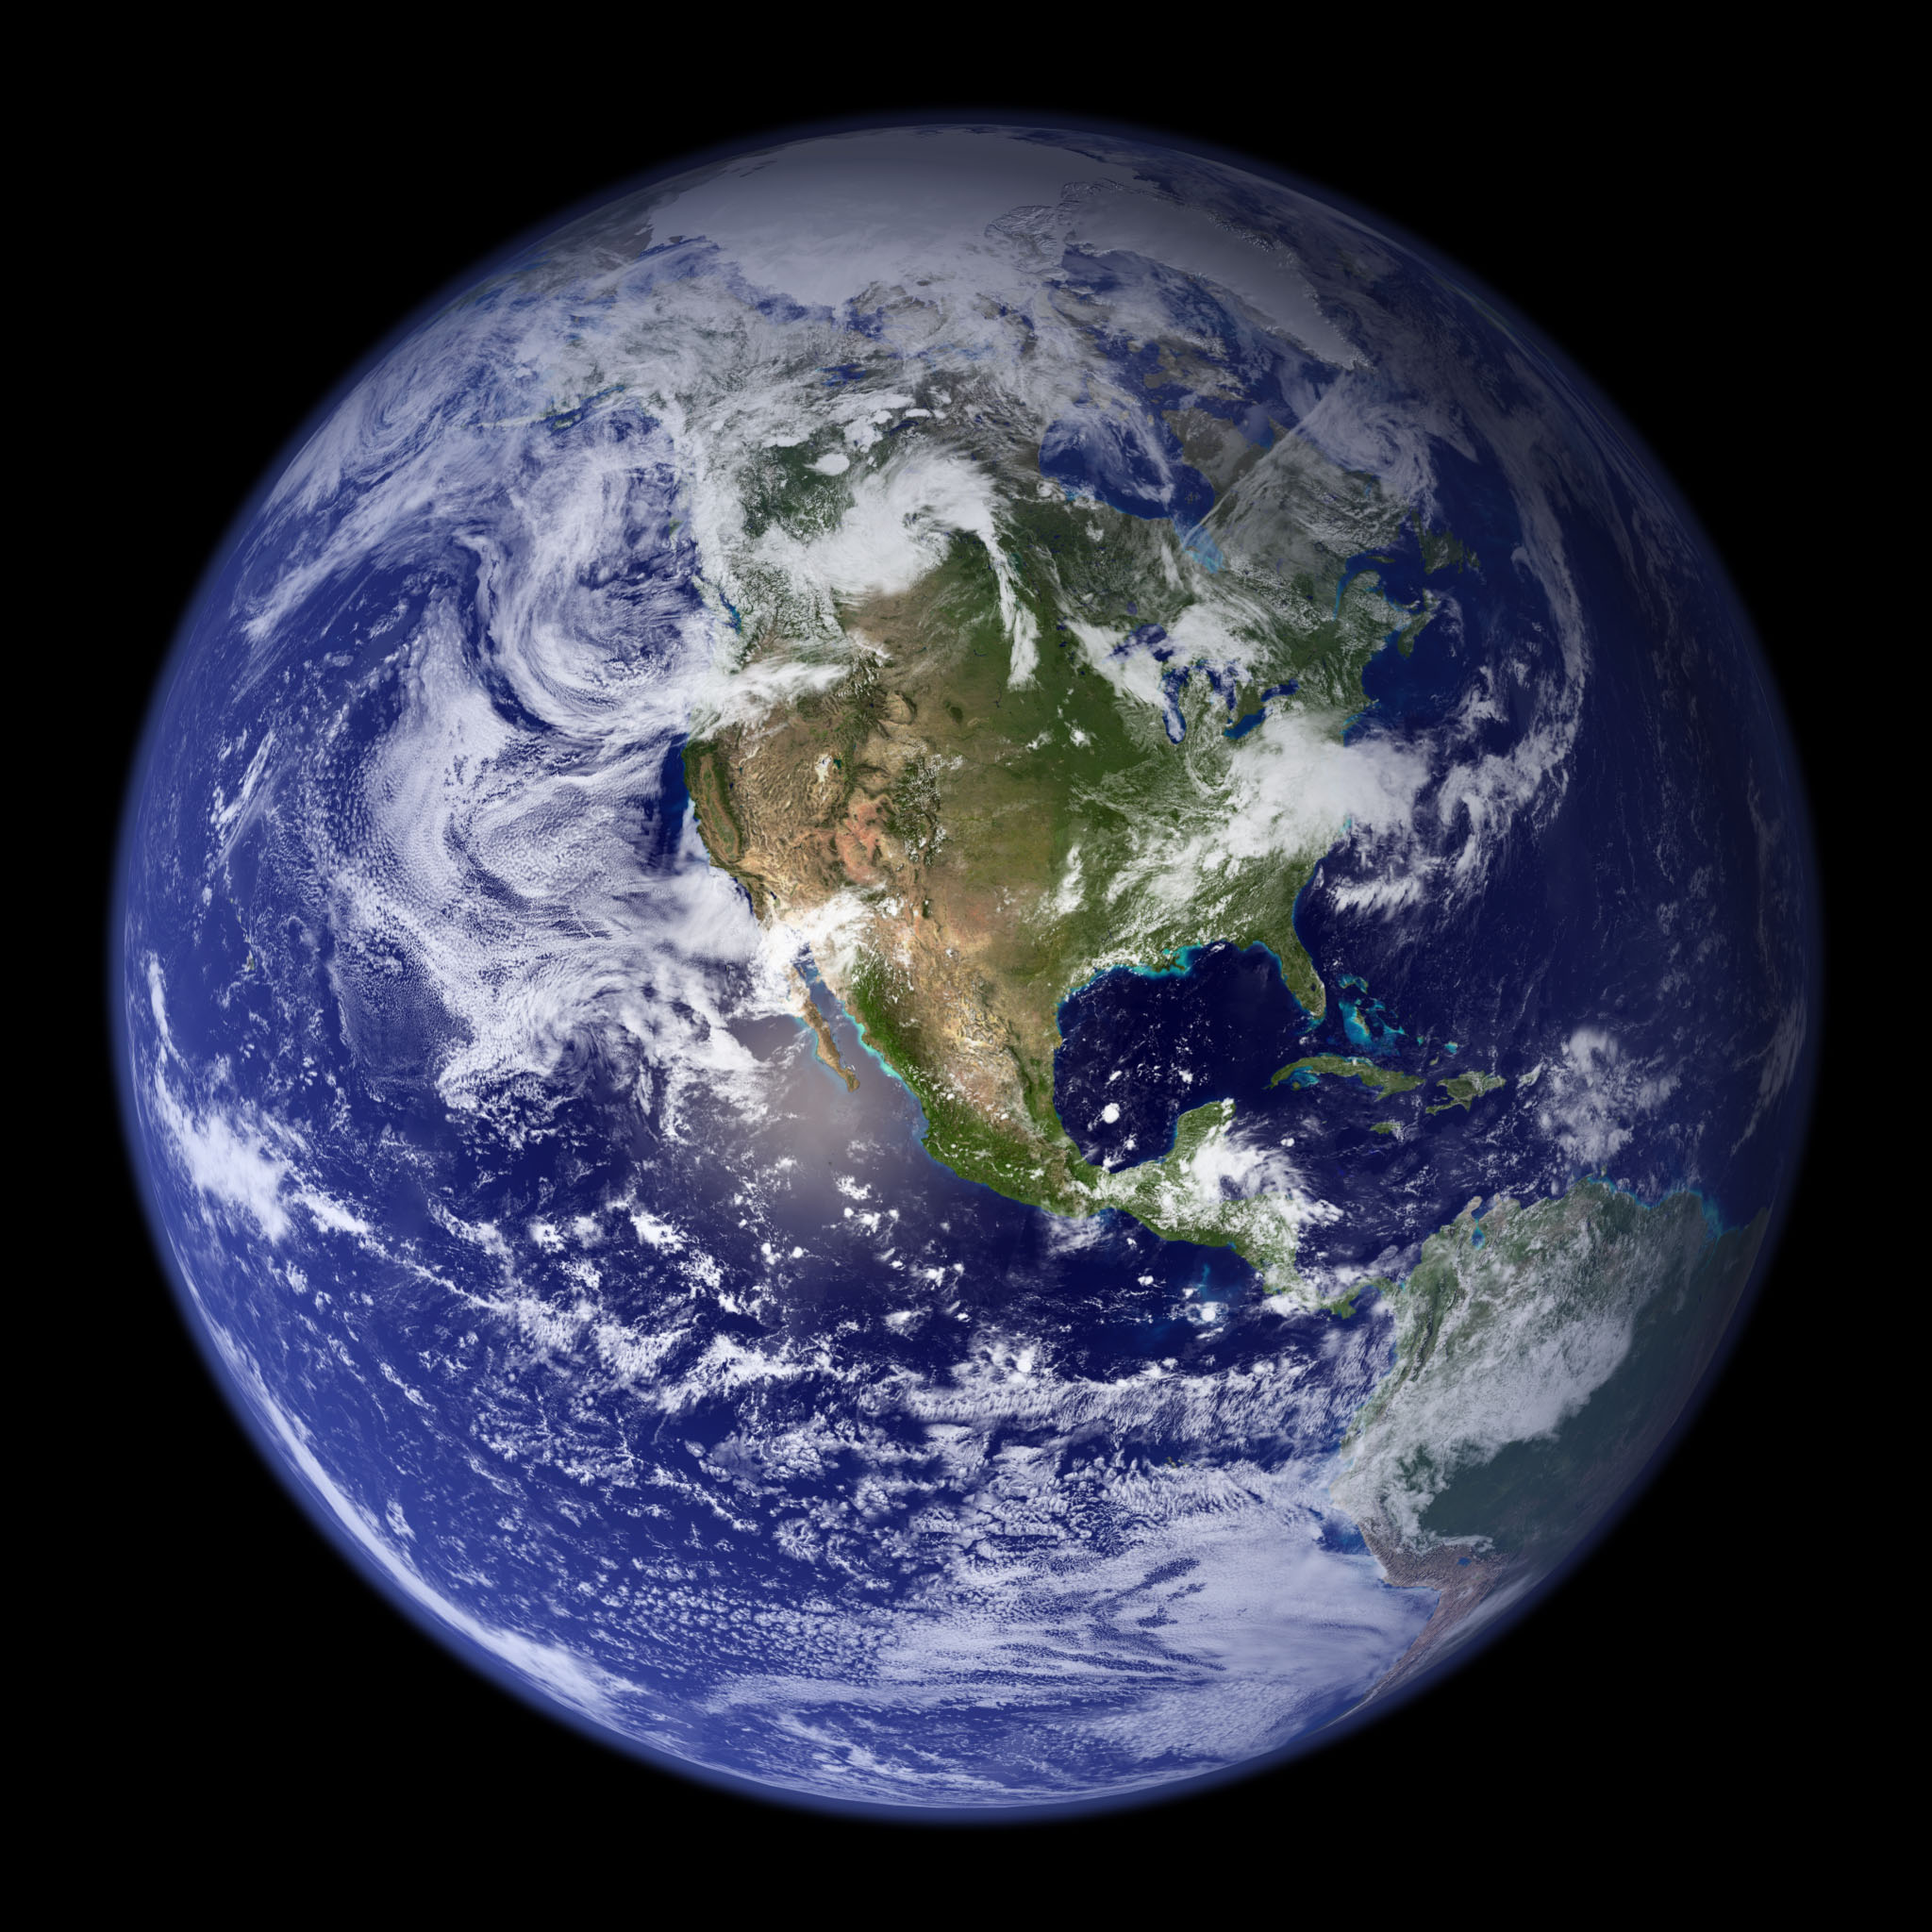 Dayside of Earth, including North America.